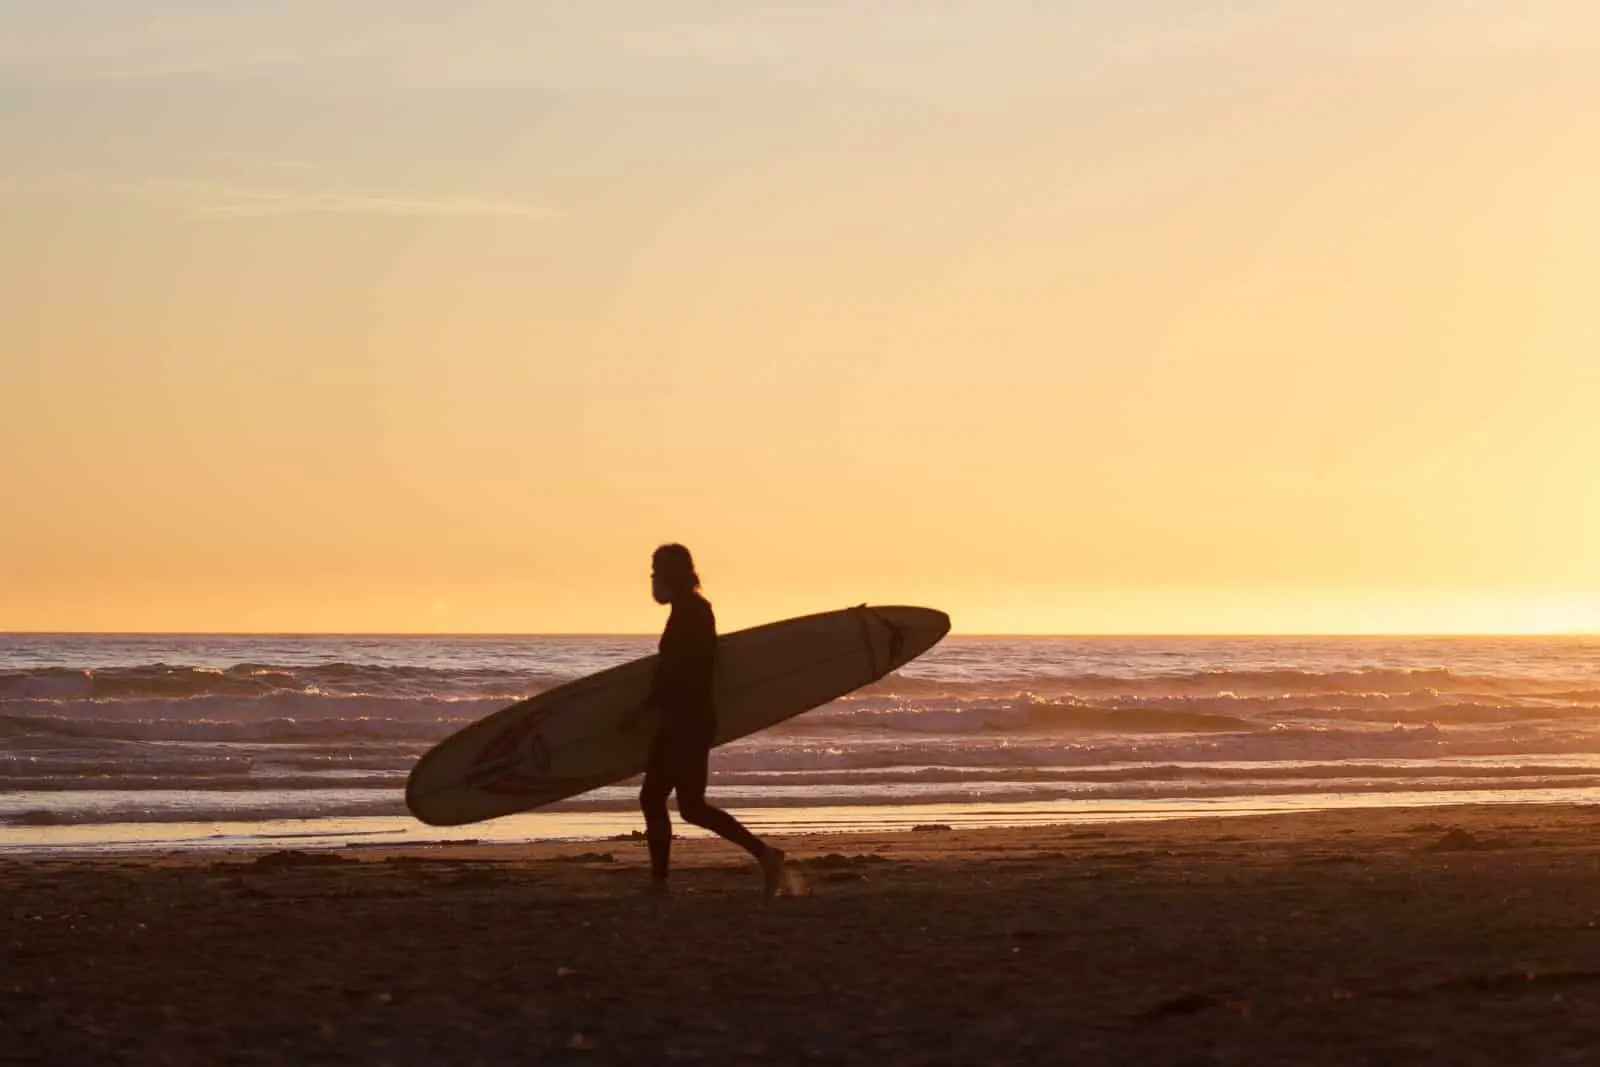 A surfer carrying their surfboard as the sun sets in Tofino